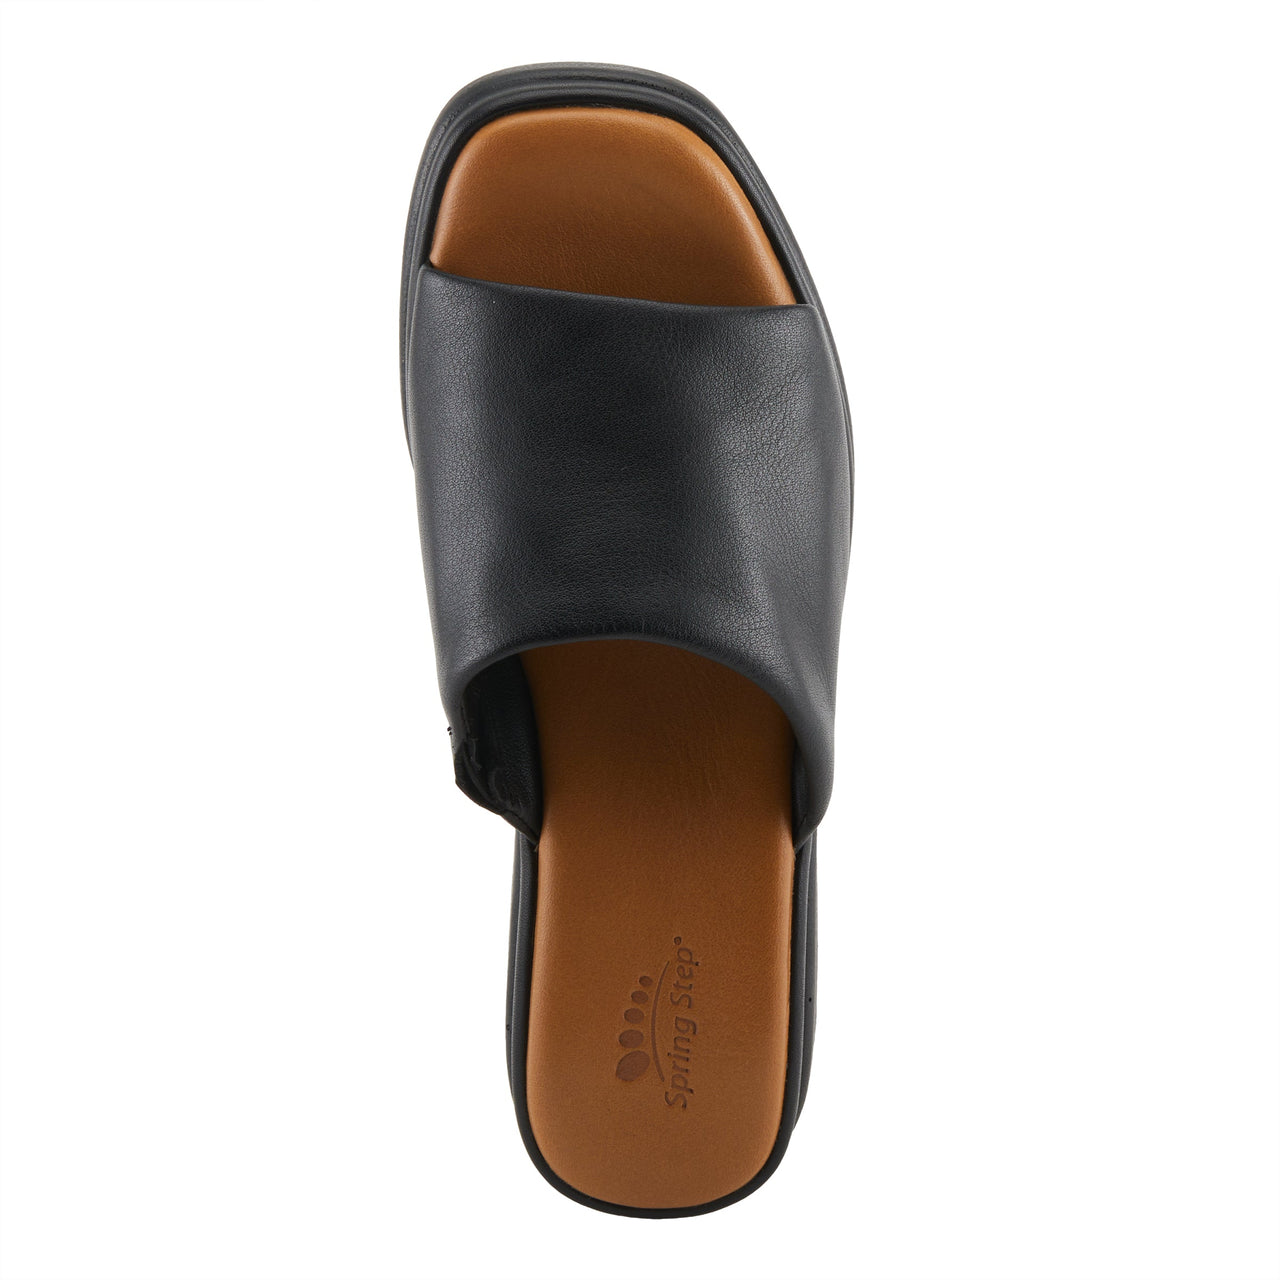 Stylish and comfortable Spring Step Fireisland sandals with leather straps and cushioned footbed in black color